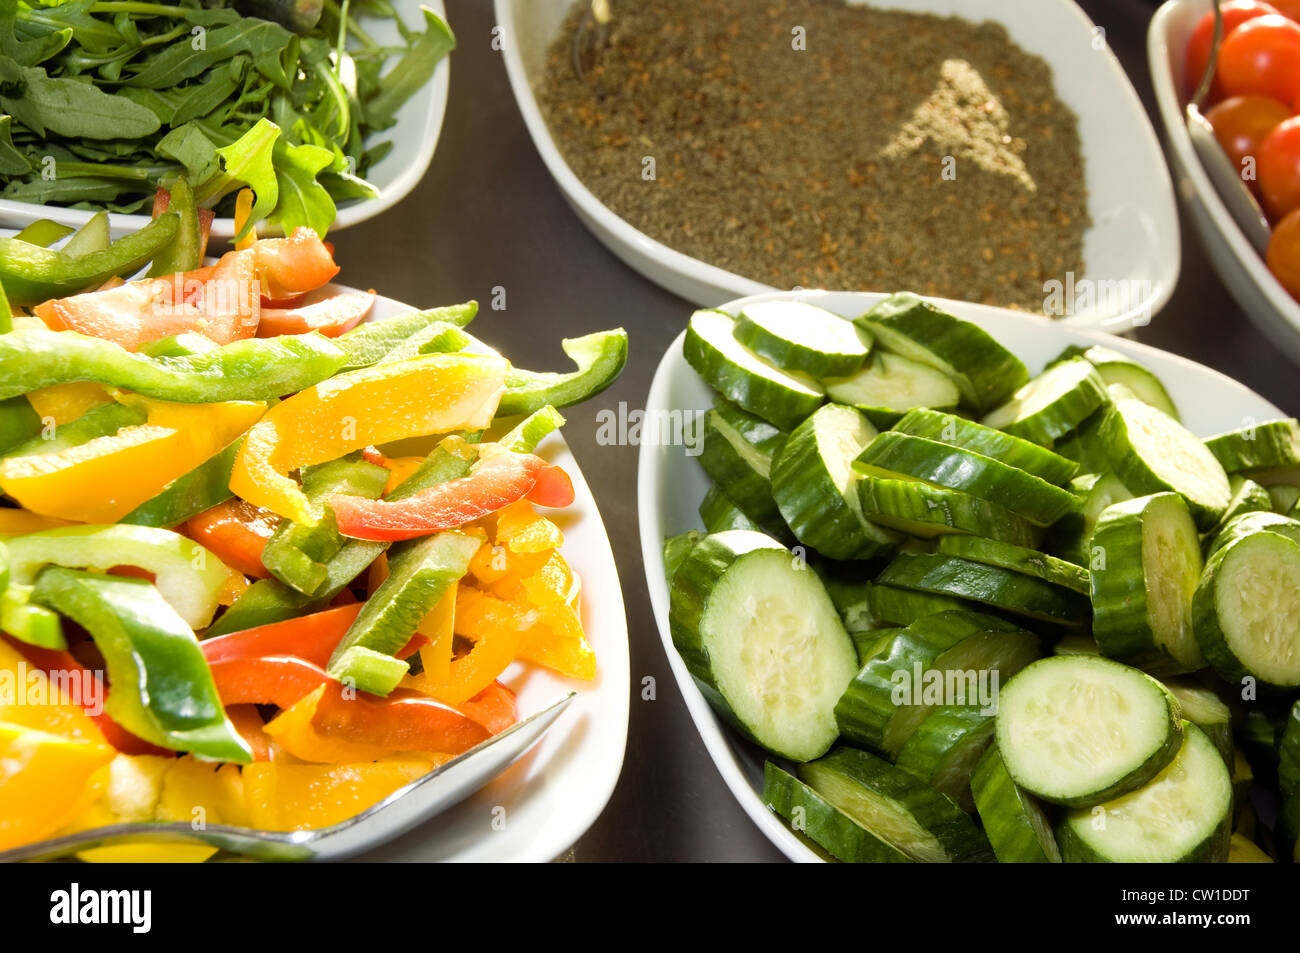 sliced vegetables zucchini peppers tomatoes with spice breakfast hotel buffet phototgraphed in Jerusalem Palestine Israel Stock Photo